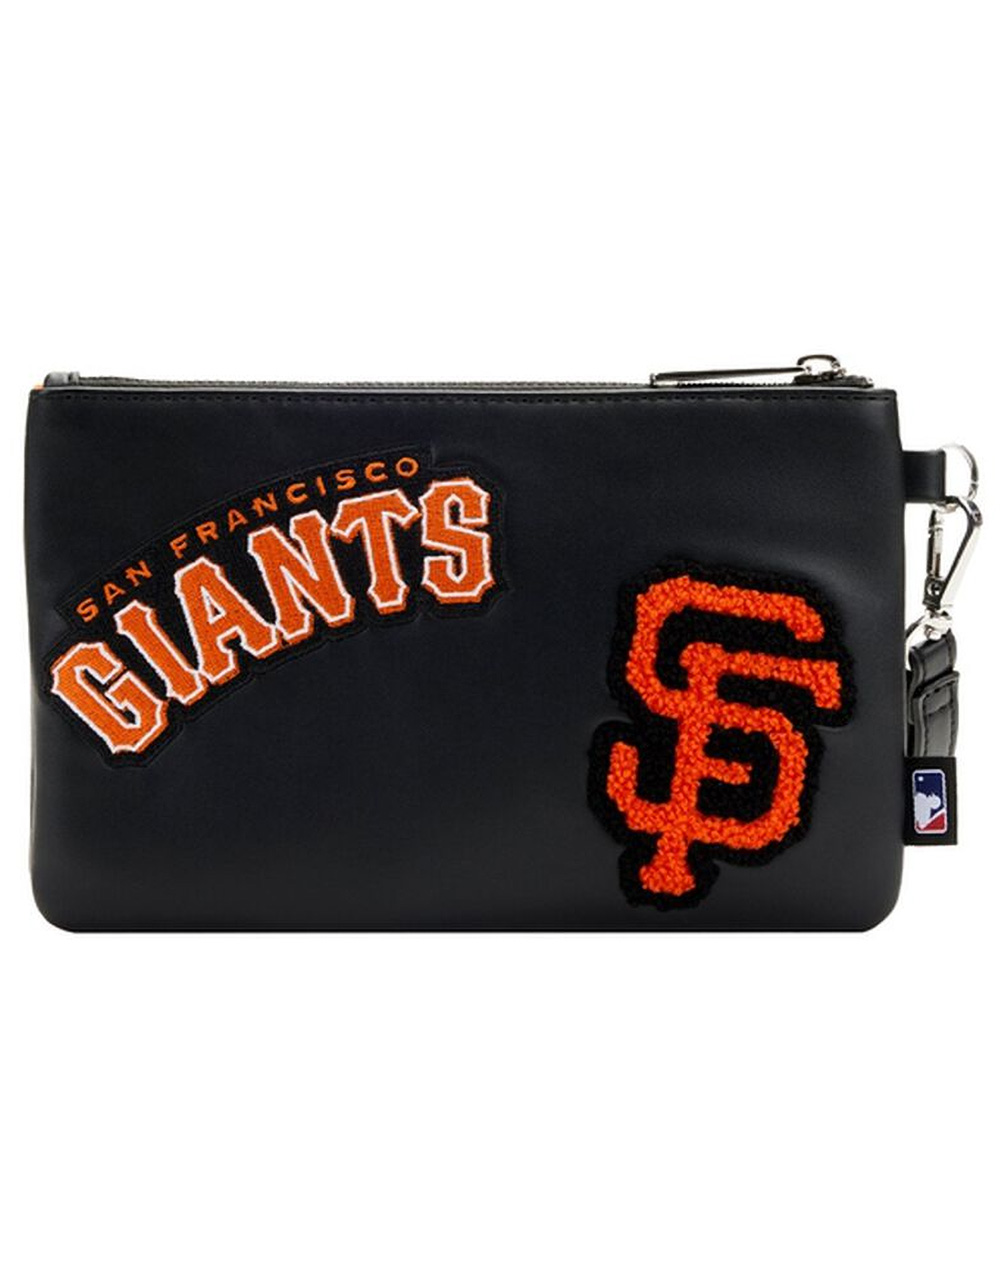 LOUNGEFLY x MLB SF Giants Stadium Crossbody Bag with Pouch - CLEAR/MULTI